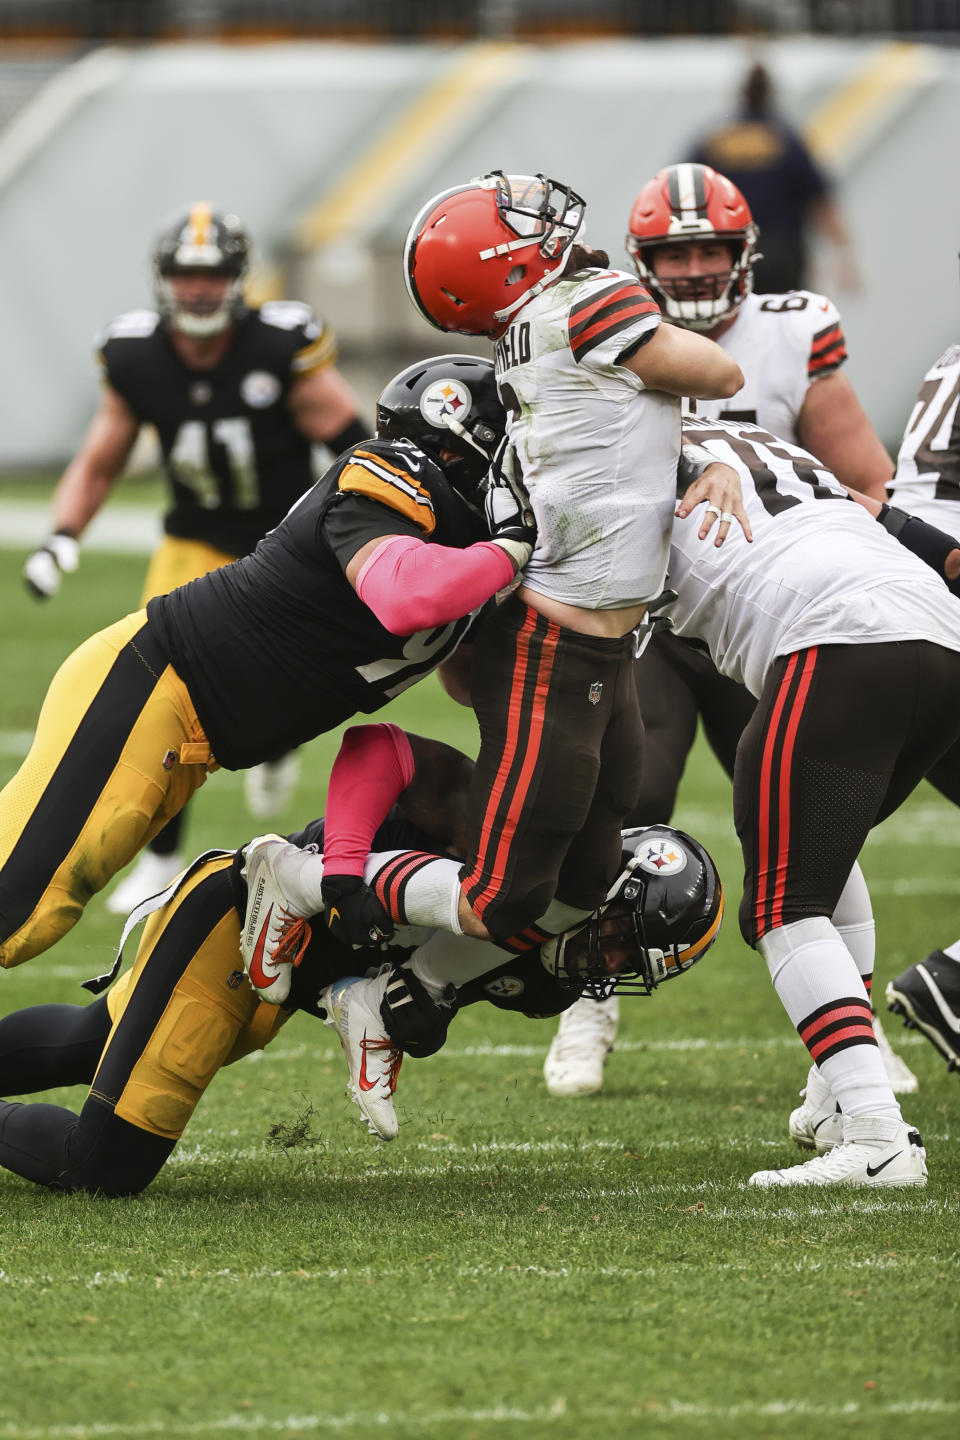 Cleveland Browns quarterback Baker Mayfield (6) is wedged during a sack by Pittsburgh Steelers defensive end Stephon Tuitt (91) in an NFL game, Sunday, Oct. 18, 2020, in Pittsburgh. The Steelers defeated the Browns 38-7. (Margaret Bowles via AP)